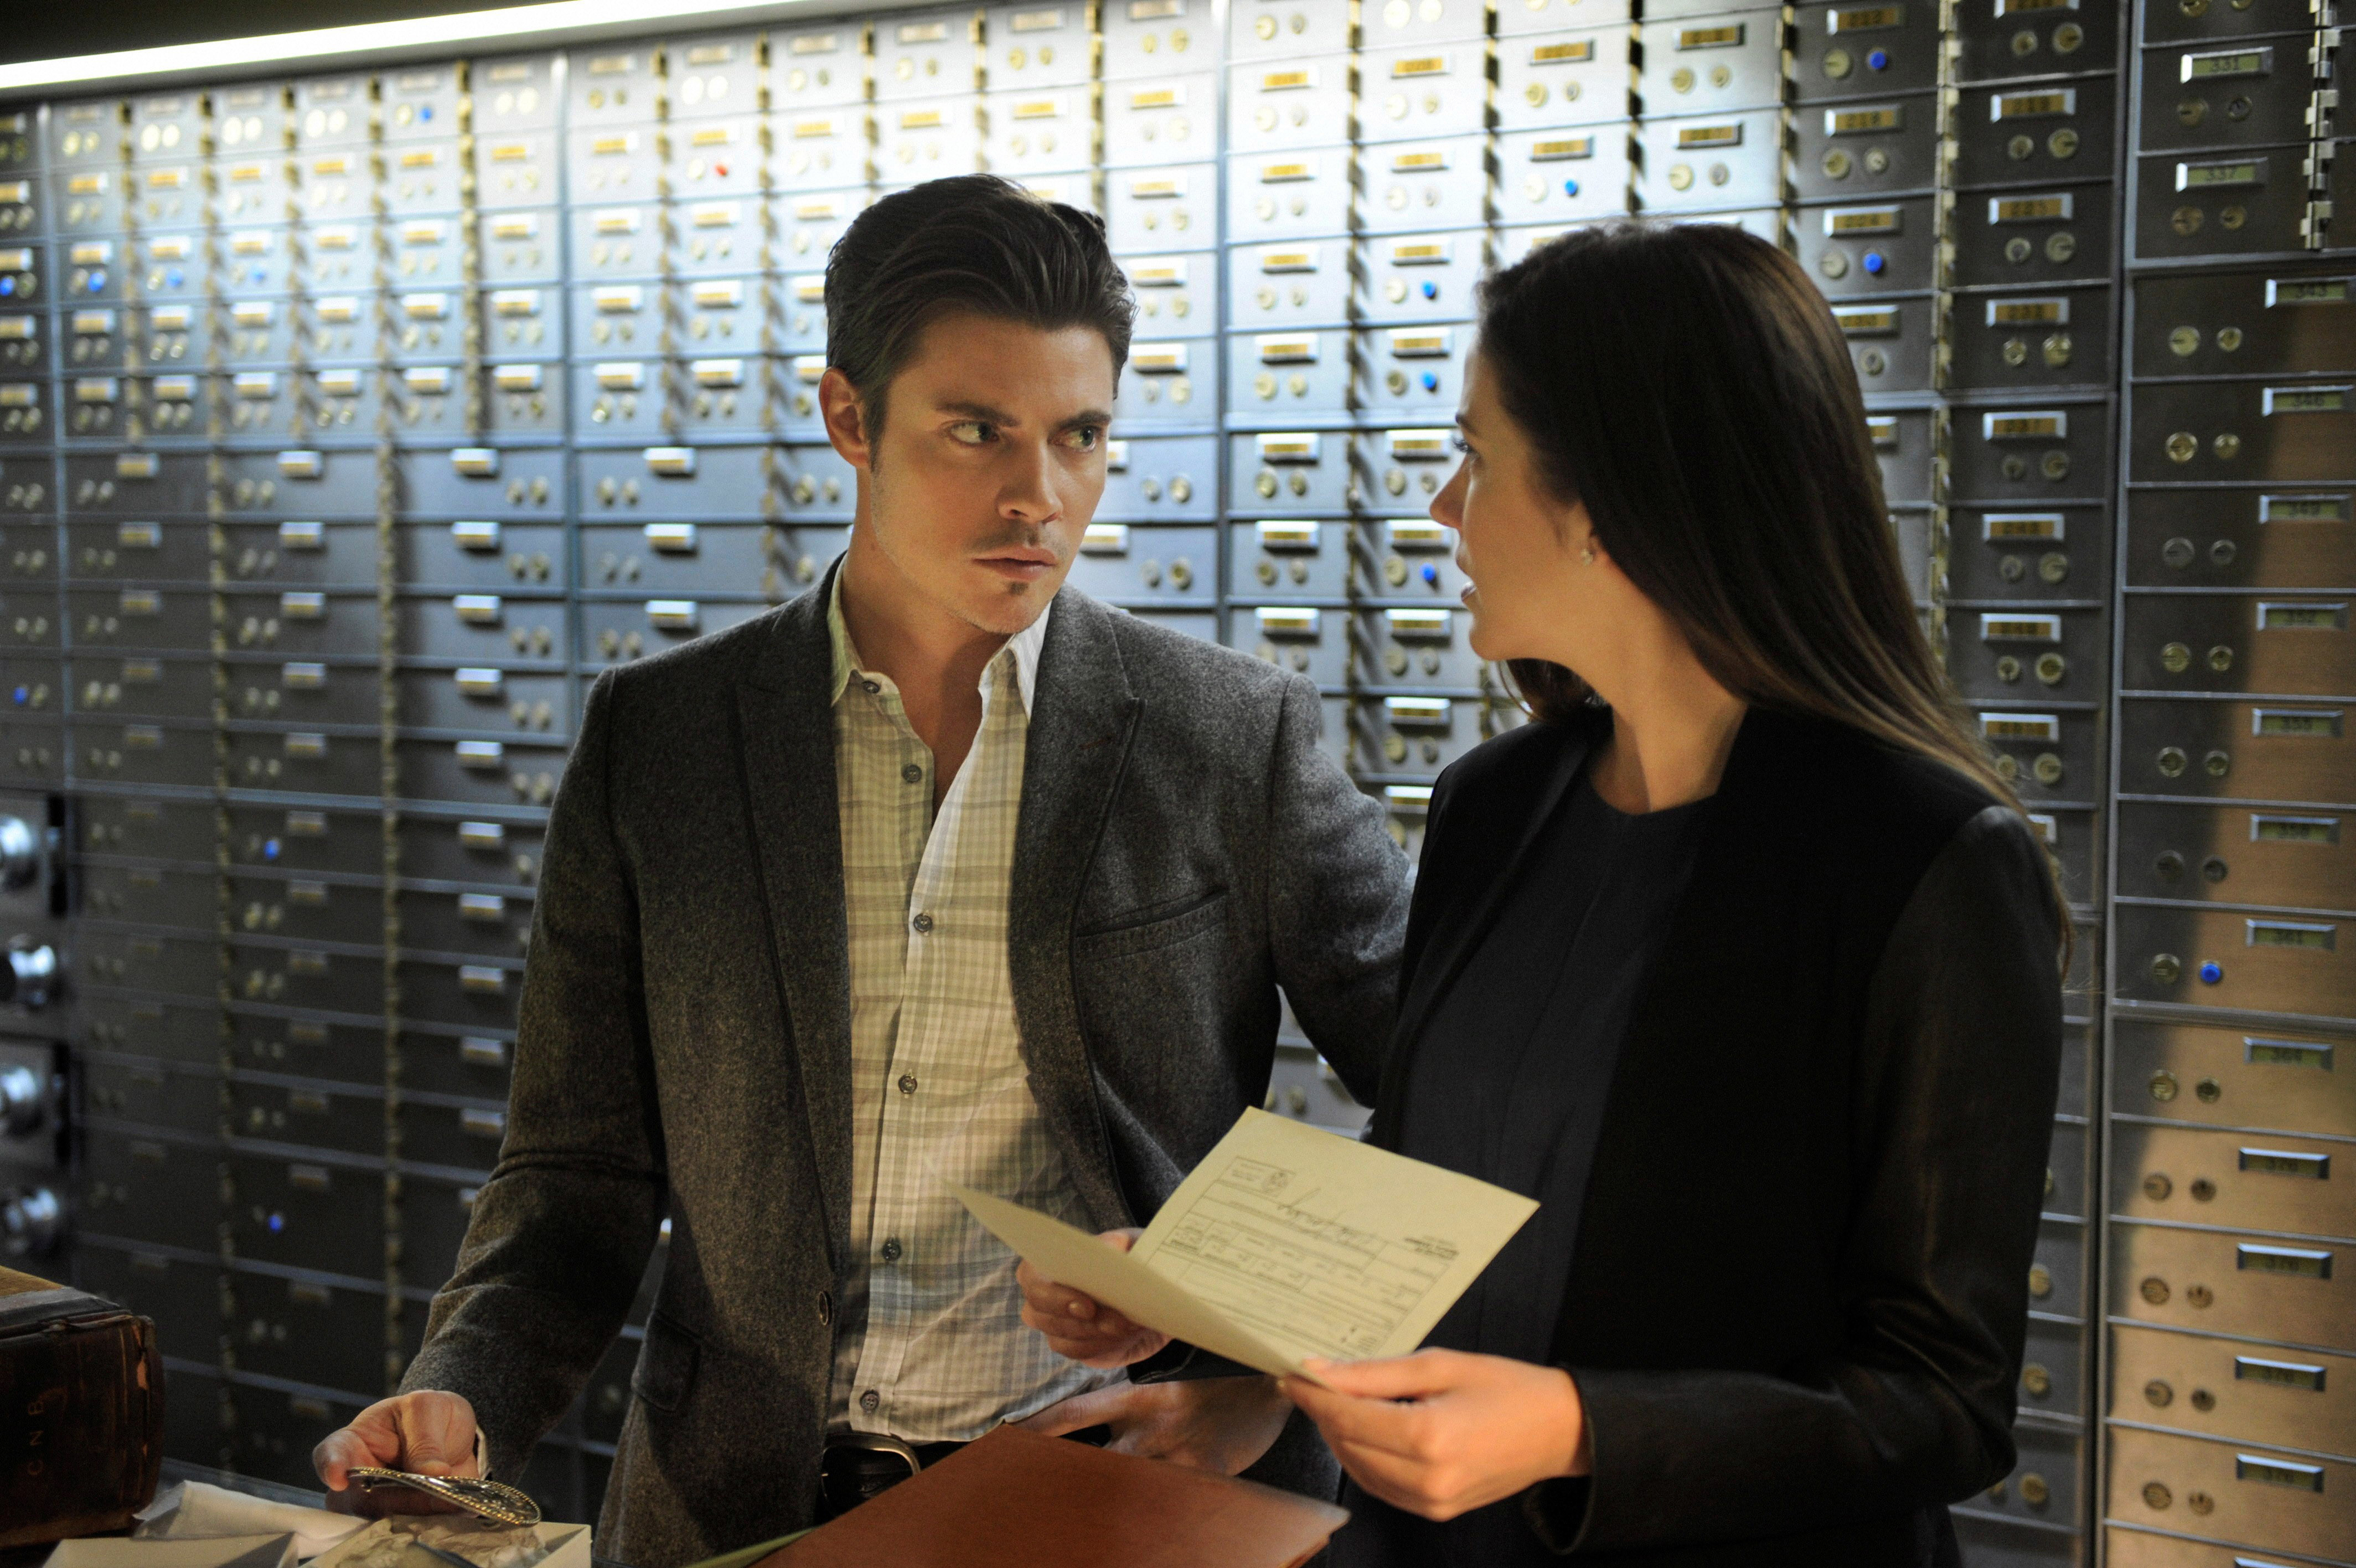 Josh Henderson and Julie Gonzaloin a scene, standing in front of a wall of safety deposit boxes, engaged in discussion